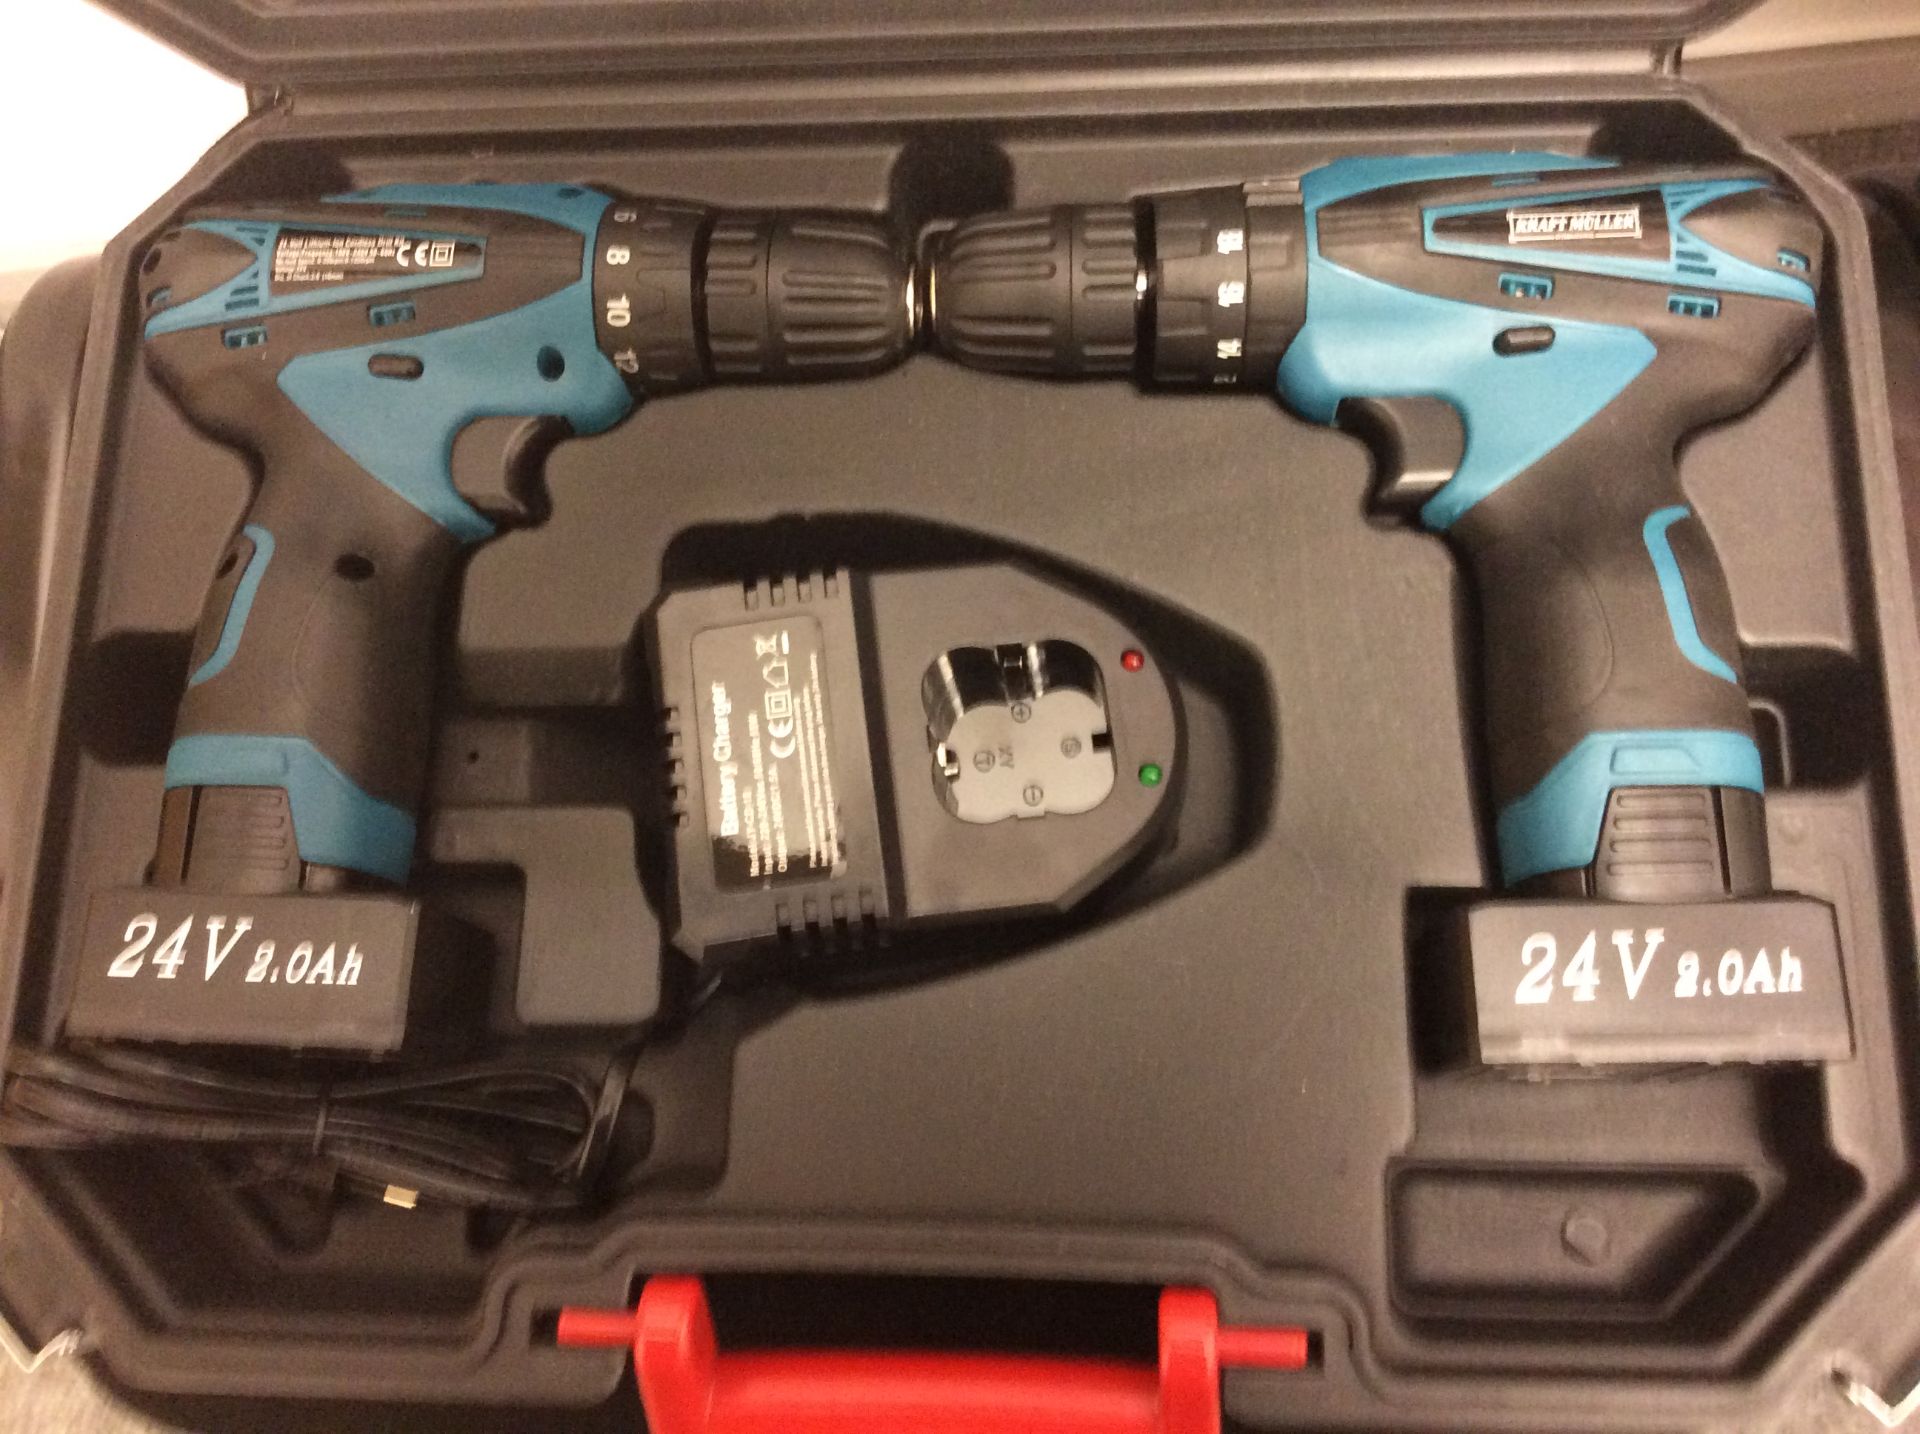 V Brand New 24 volt Twin Drill Set Lithium Ion Cordless In Carry Case With Keyless Chuck - Impact - Bild 2 aus 3